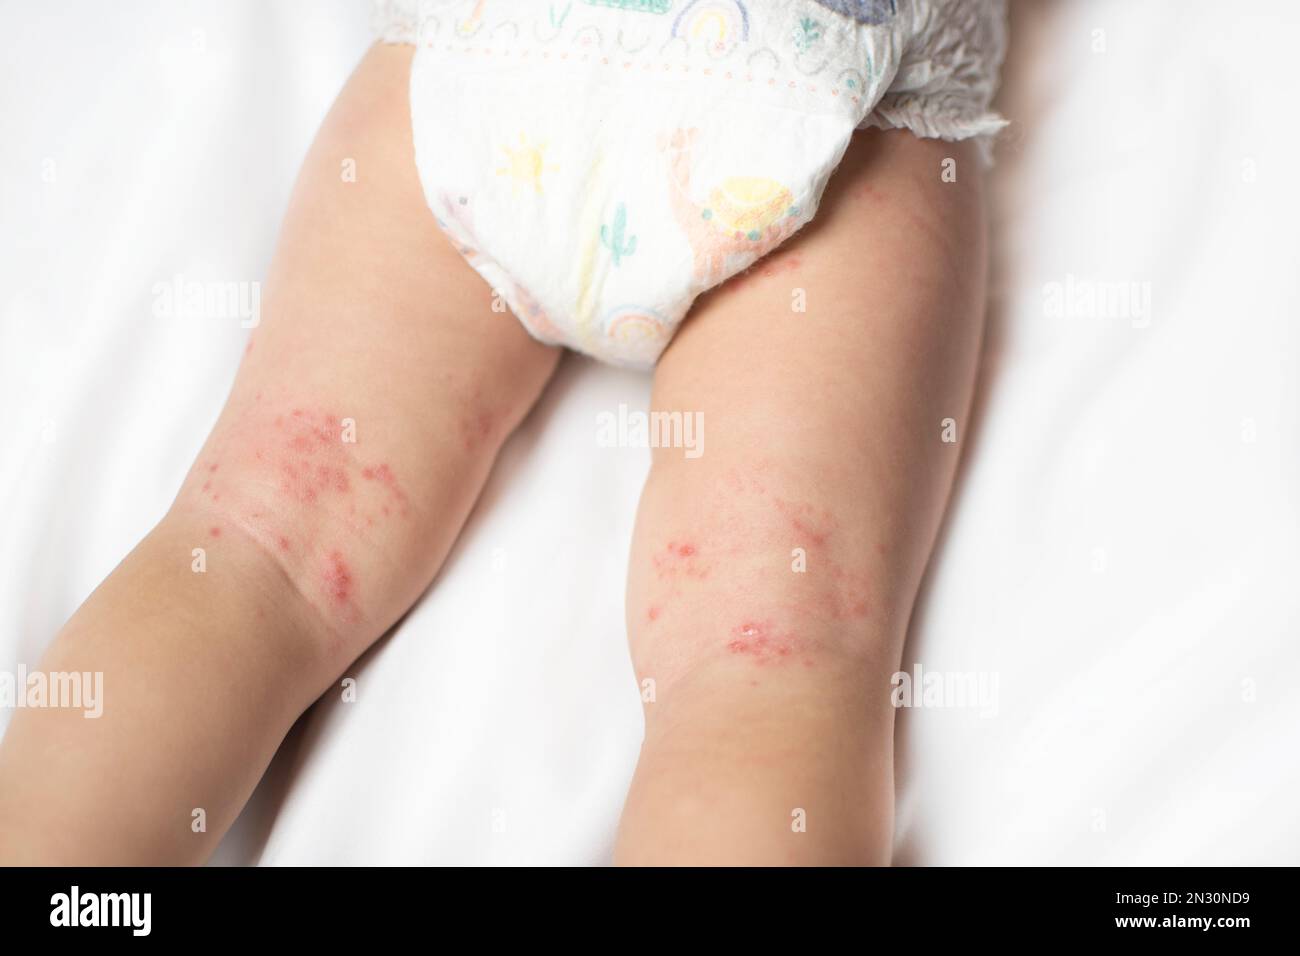 Hand, Foot, and Mouth disease rash on a baby's legs. Coxsackie virus Stock Photo